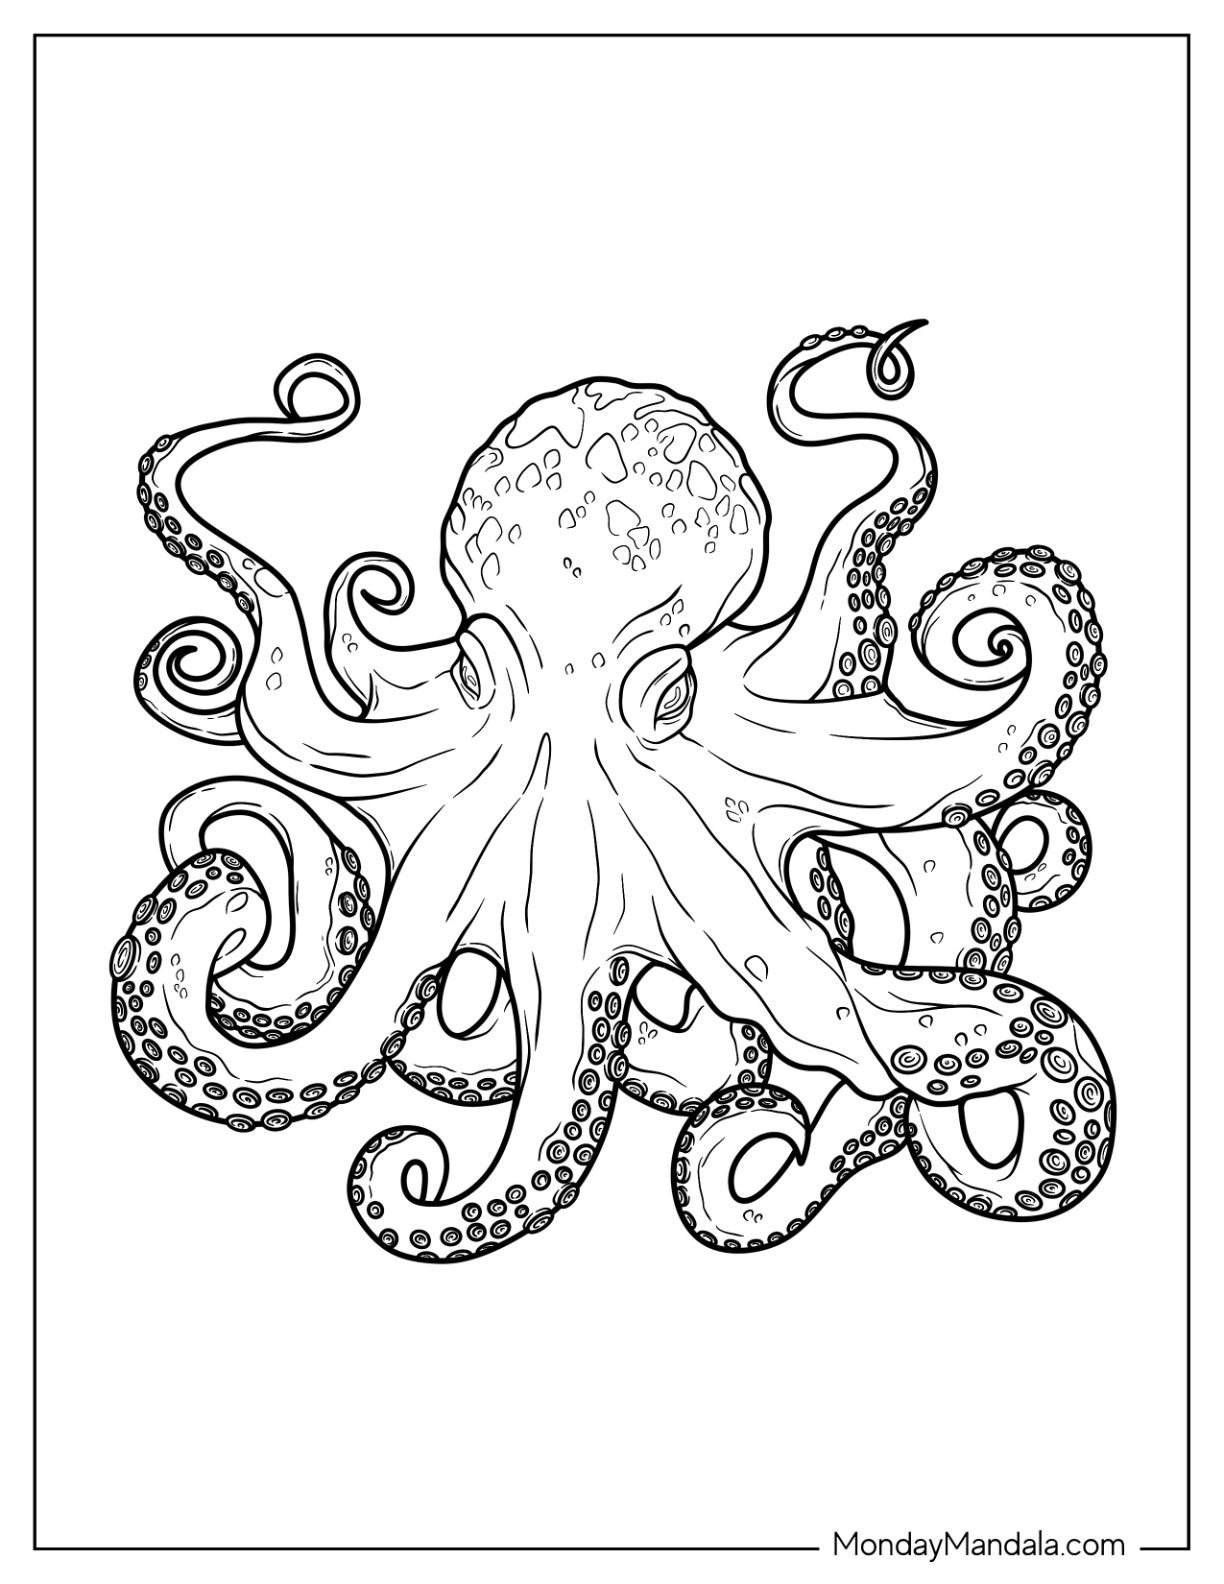 Octopus coloring pages free pdf printables